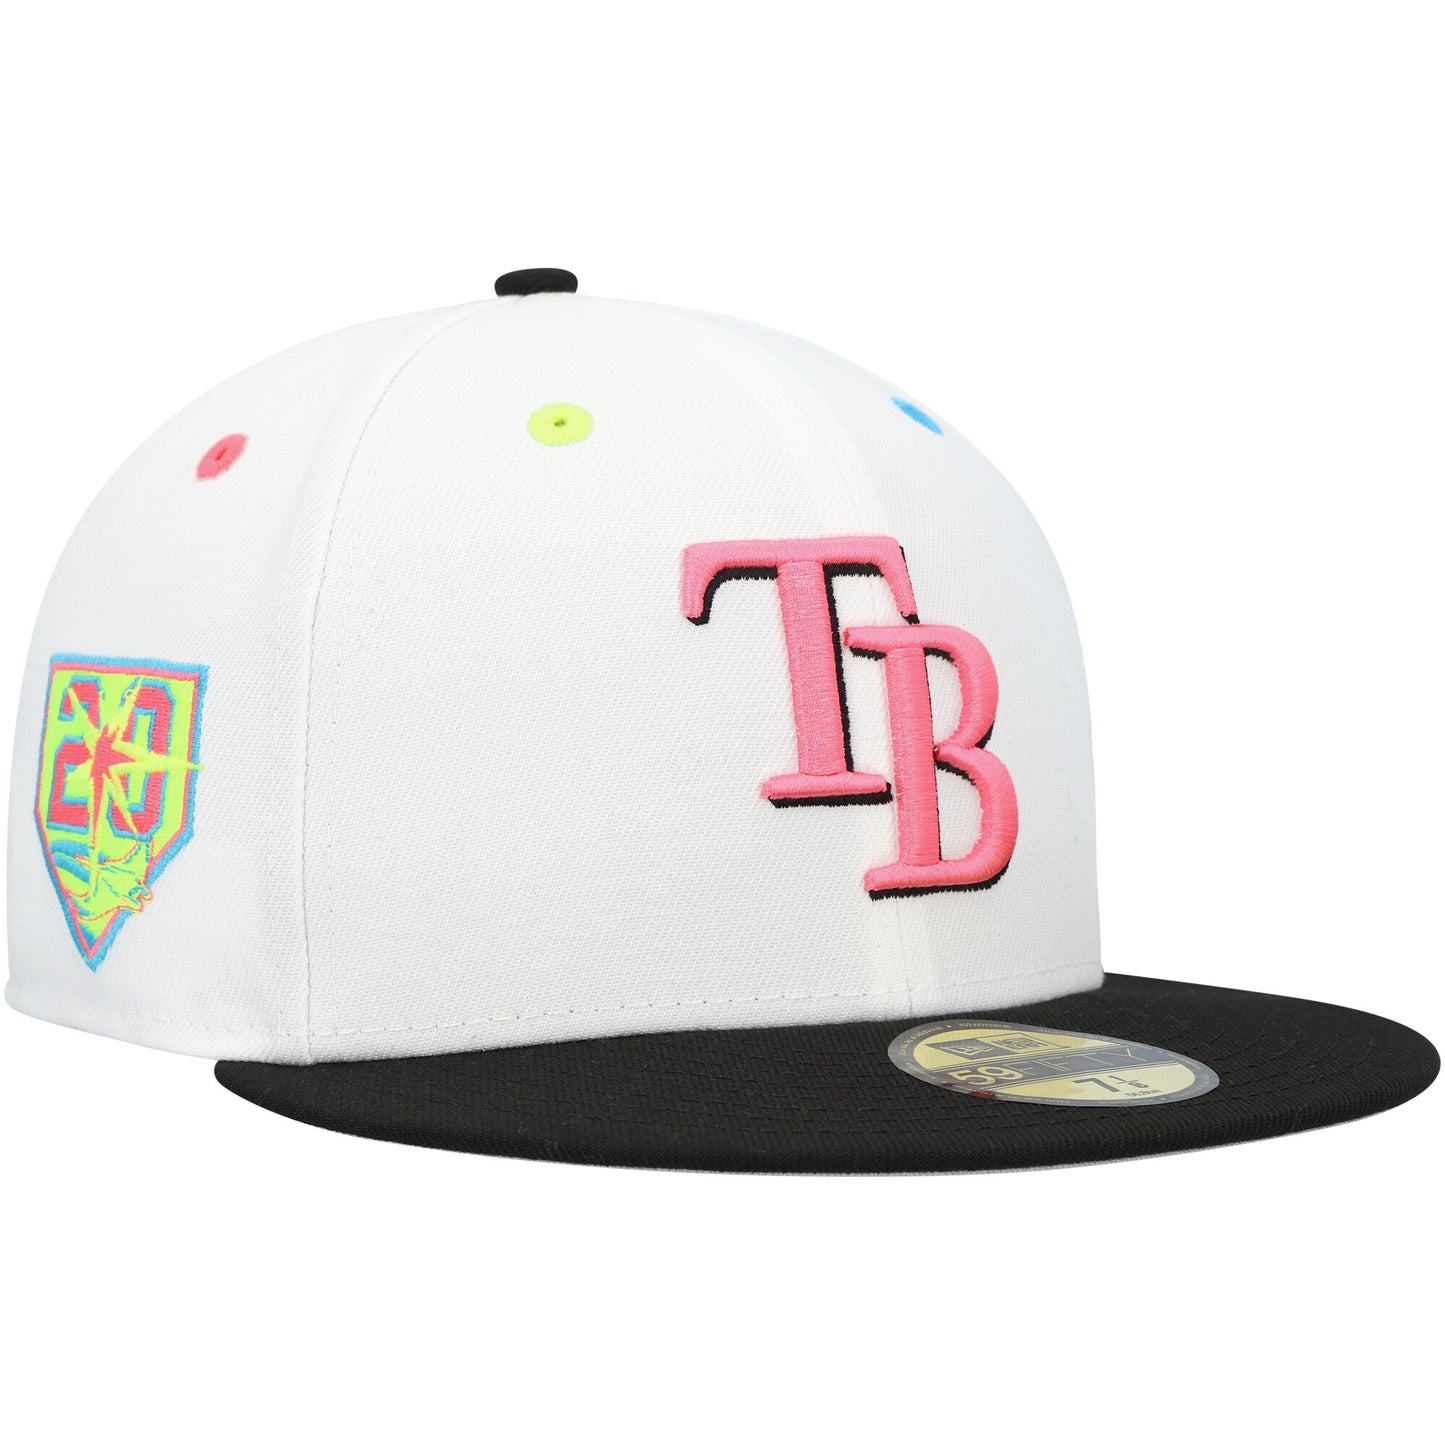 Tampa Bay Rays New Era Neon Eye 59FIFTY Fitted Hat - White